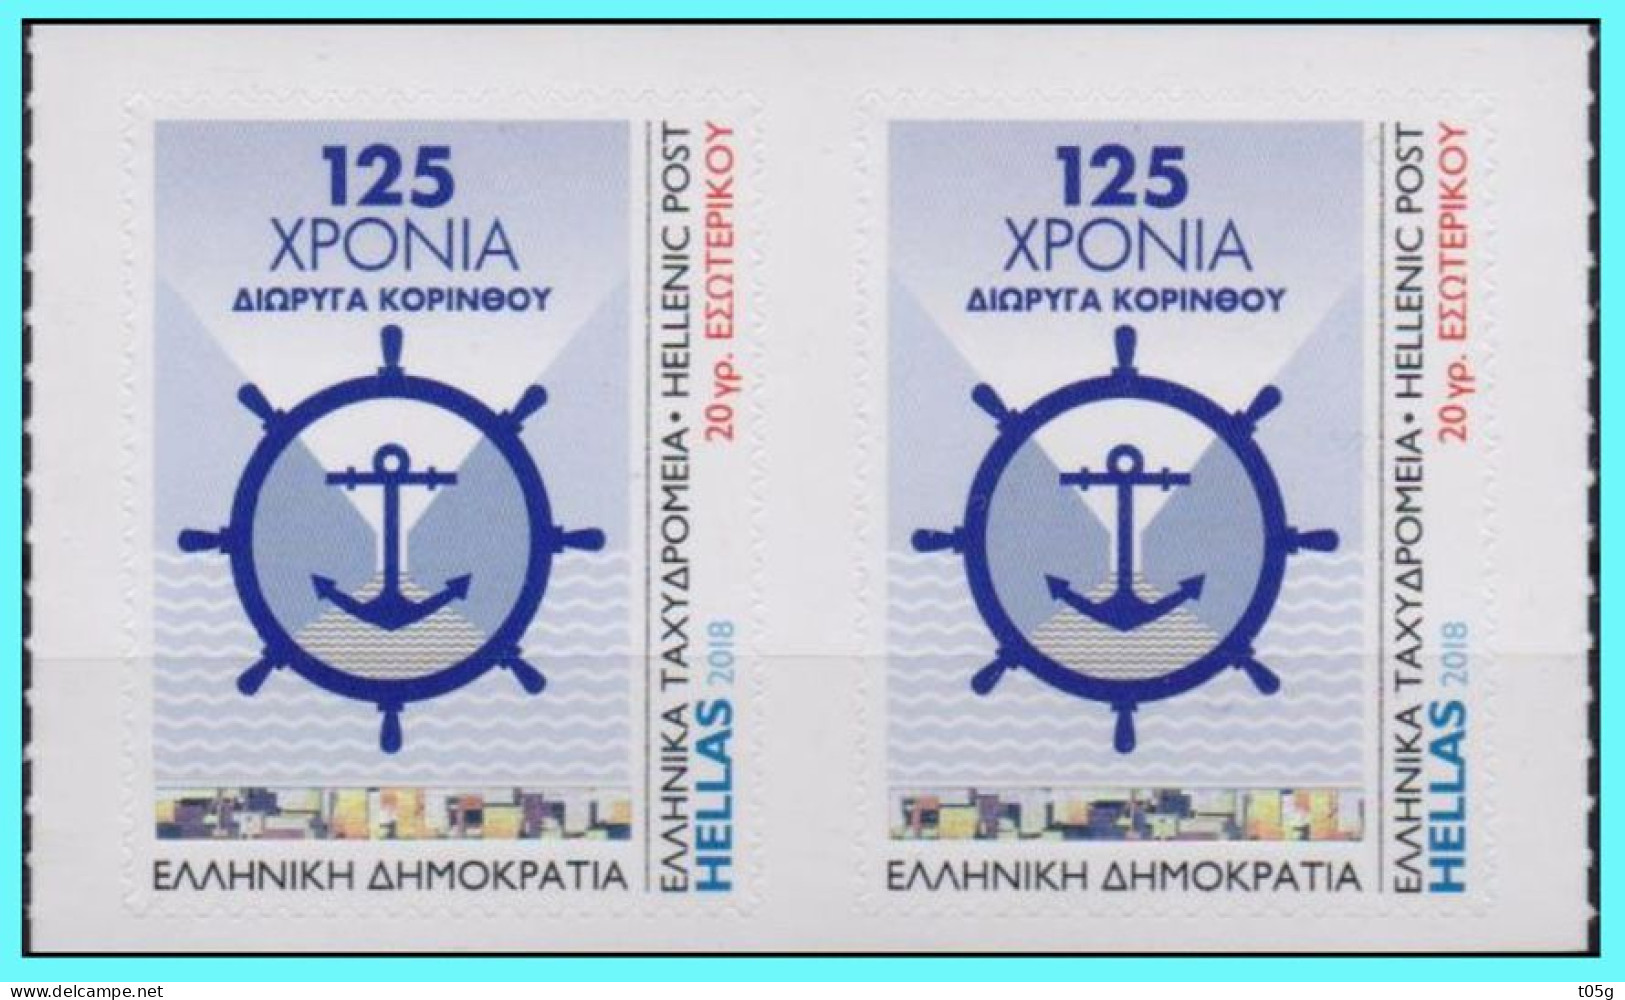 GREECE- GRECE  - HELLAS  2018: 125 YEARS OF THE KORINTH CANAL- Two Self-athesive Stamps From Booklet  MNH** - Nuovi